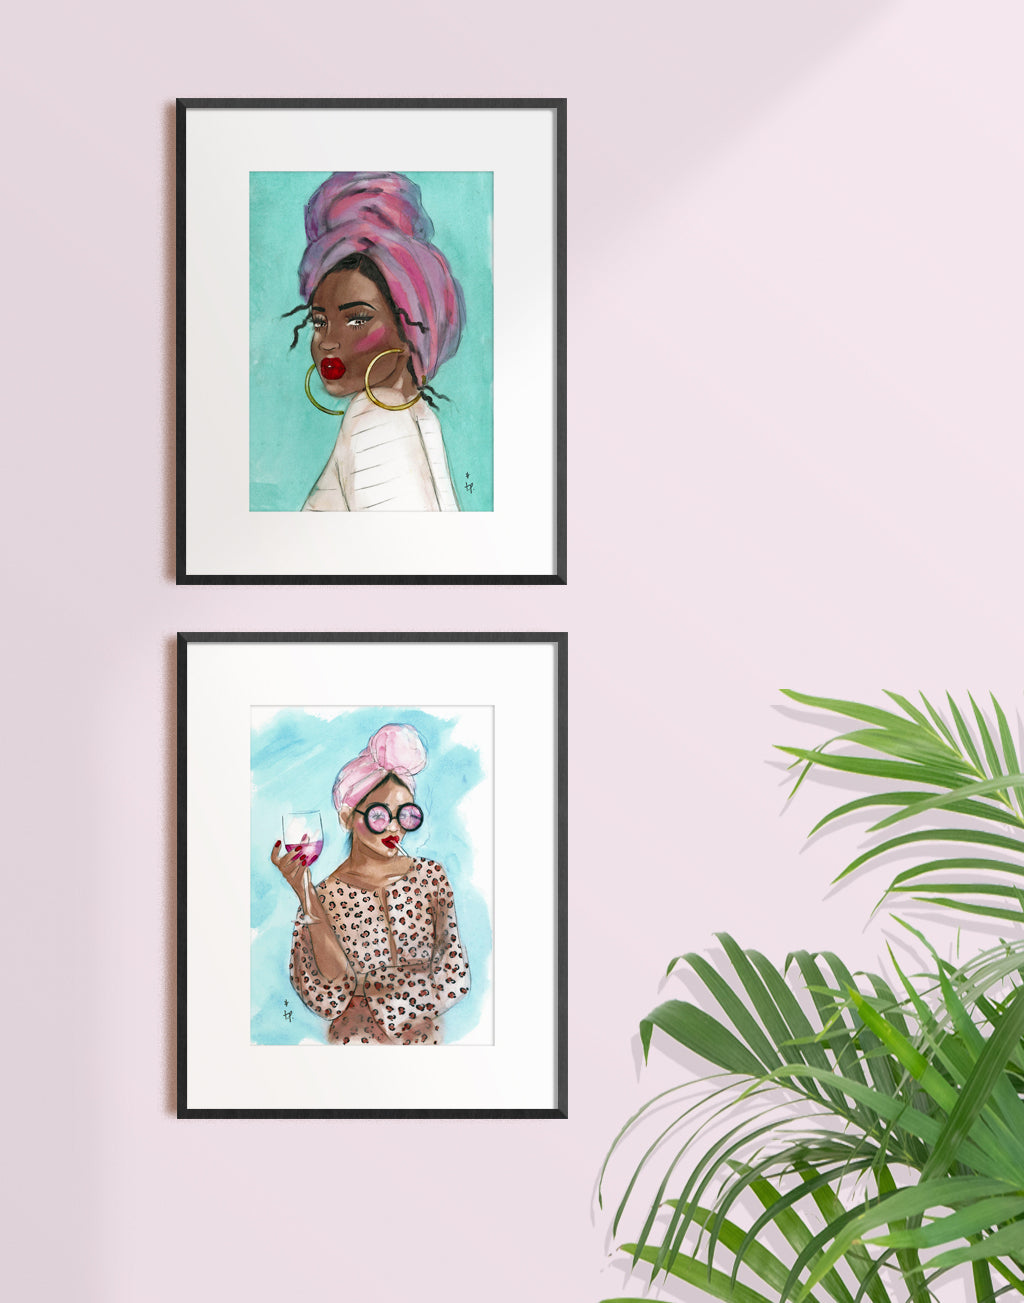 Framed print of a woman holding a glass of wine and wearing a headscarf by Tatiana Poblah